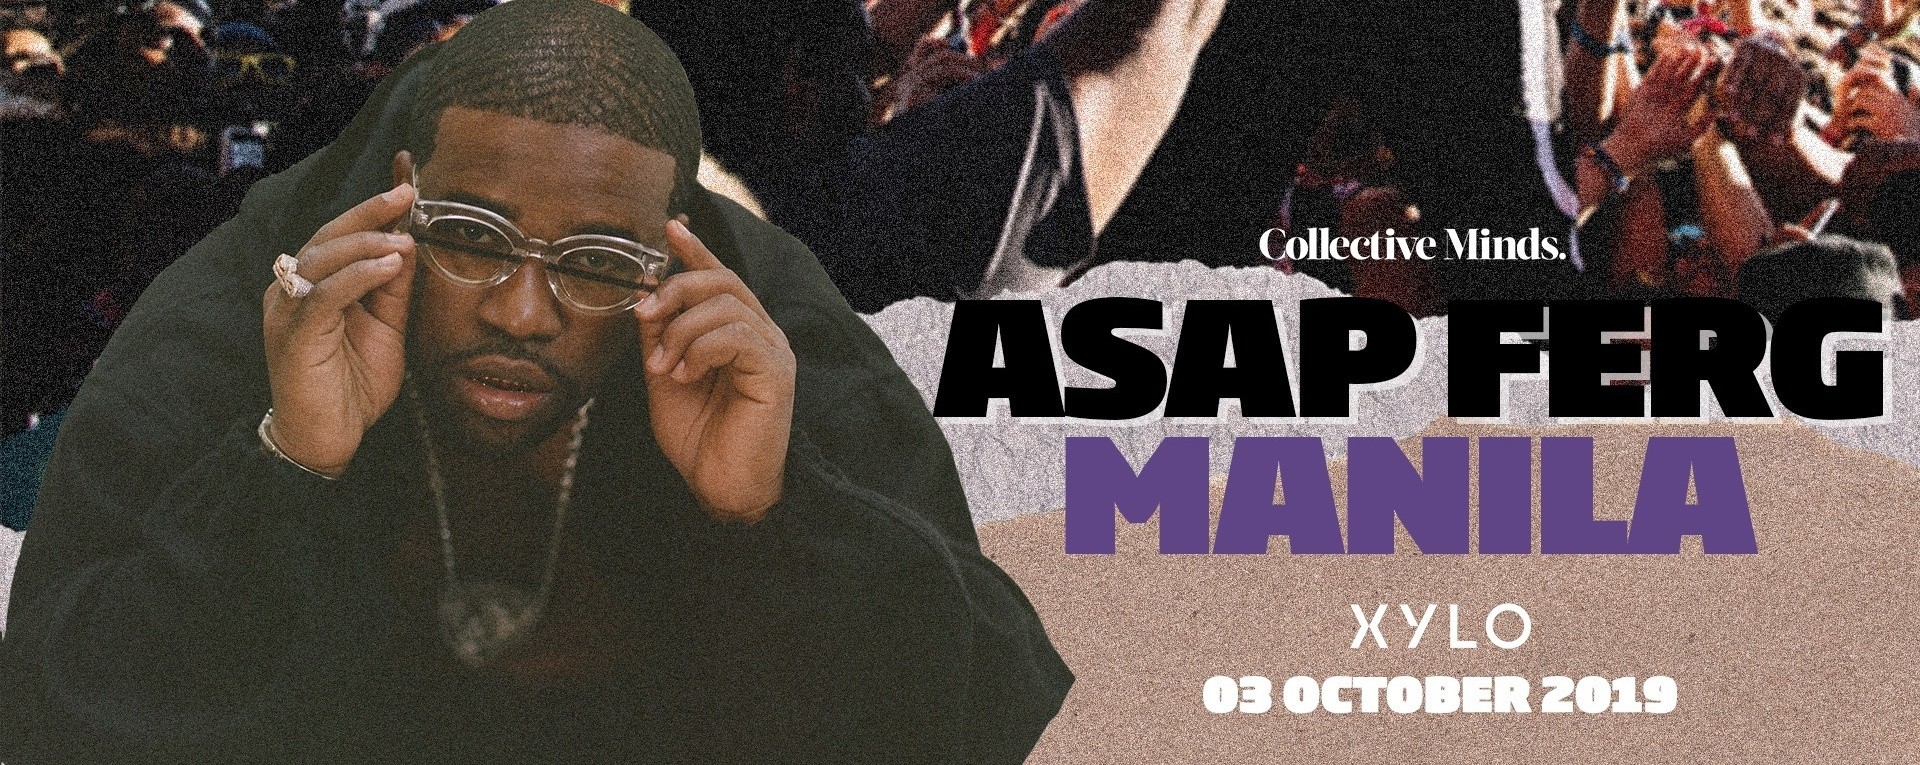 A$AP Ferg Manila presented by Collective Minds x CC:Concepts